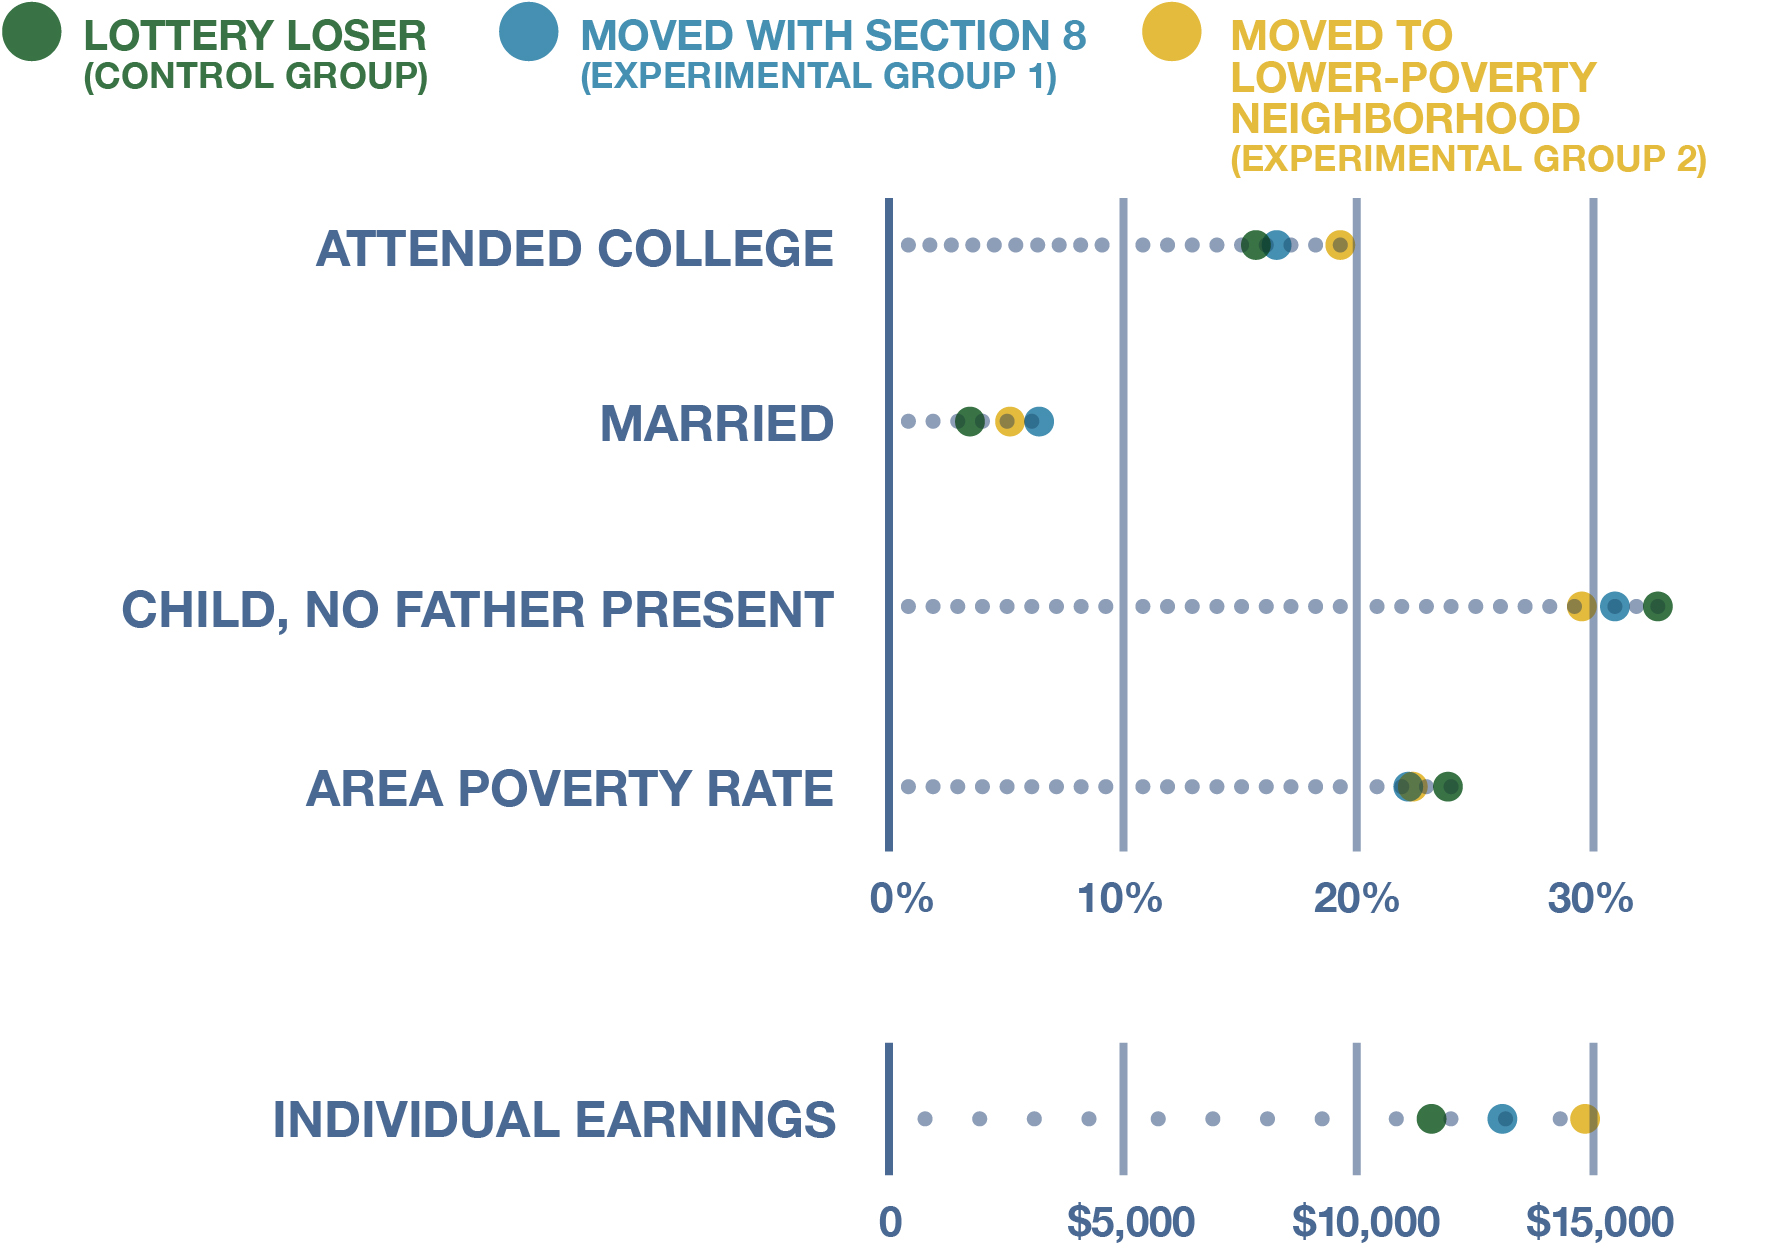 Chart showing outcomes such as attending college, getting married, and growing up with an absent father for the three groups in the Moving to Opportunity field experiment. These measures largely show better outcomes for the two experimental groups compared to the control group.